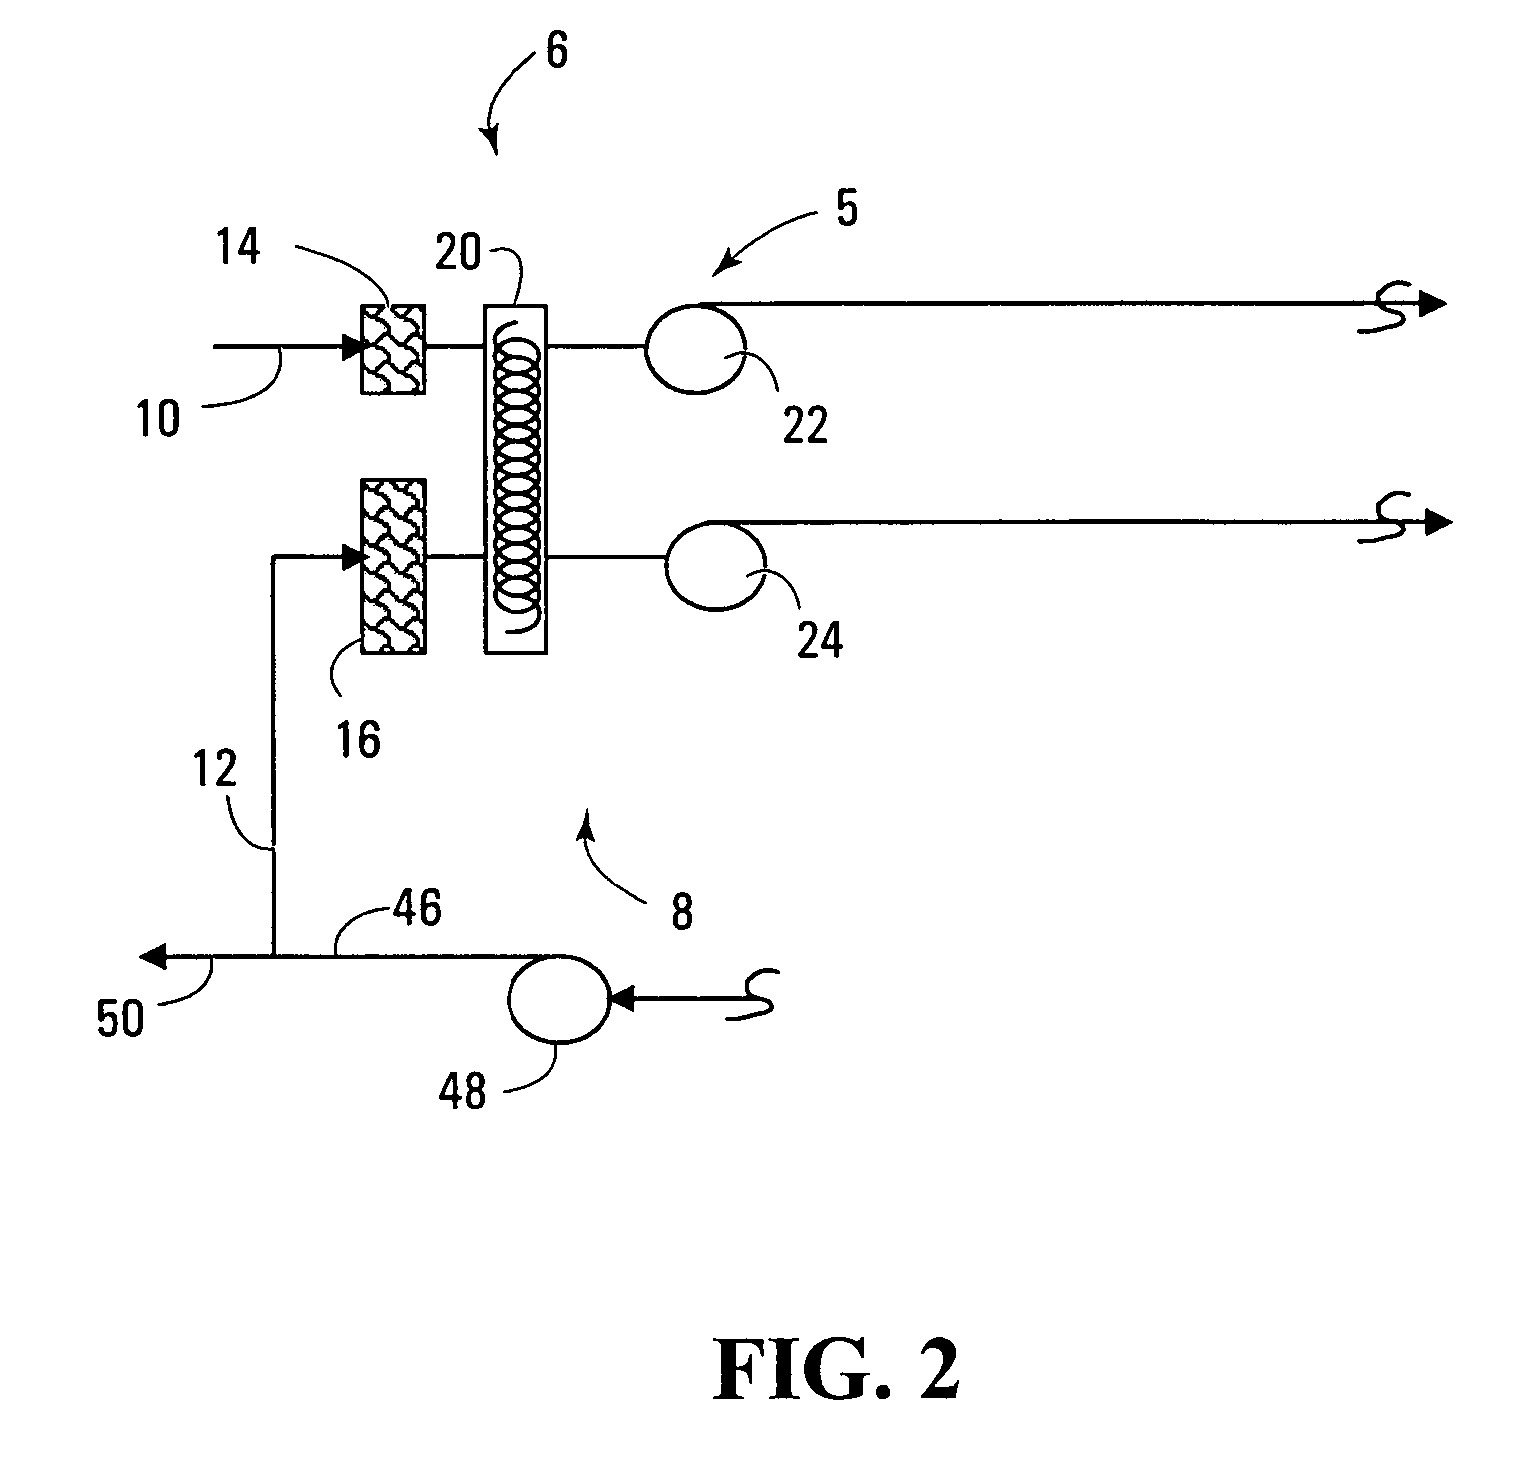 Dual-compartment ventilation and air-conditioning system having a shared heating coil